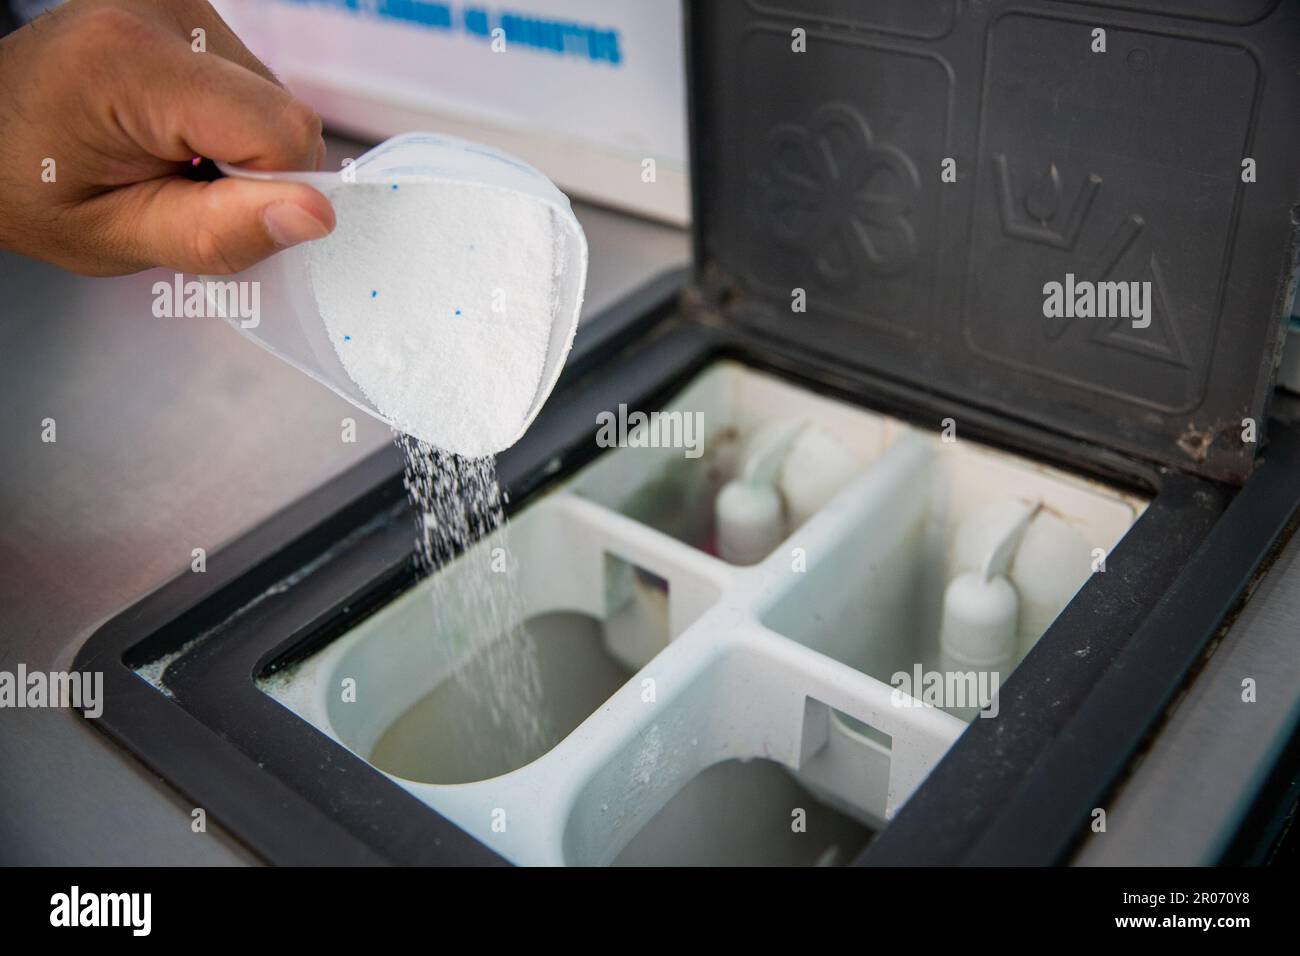 Close-up of a man's hands pouring powder detergent into washing machine in laundry room Stock Photo